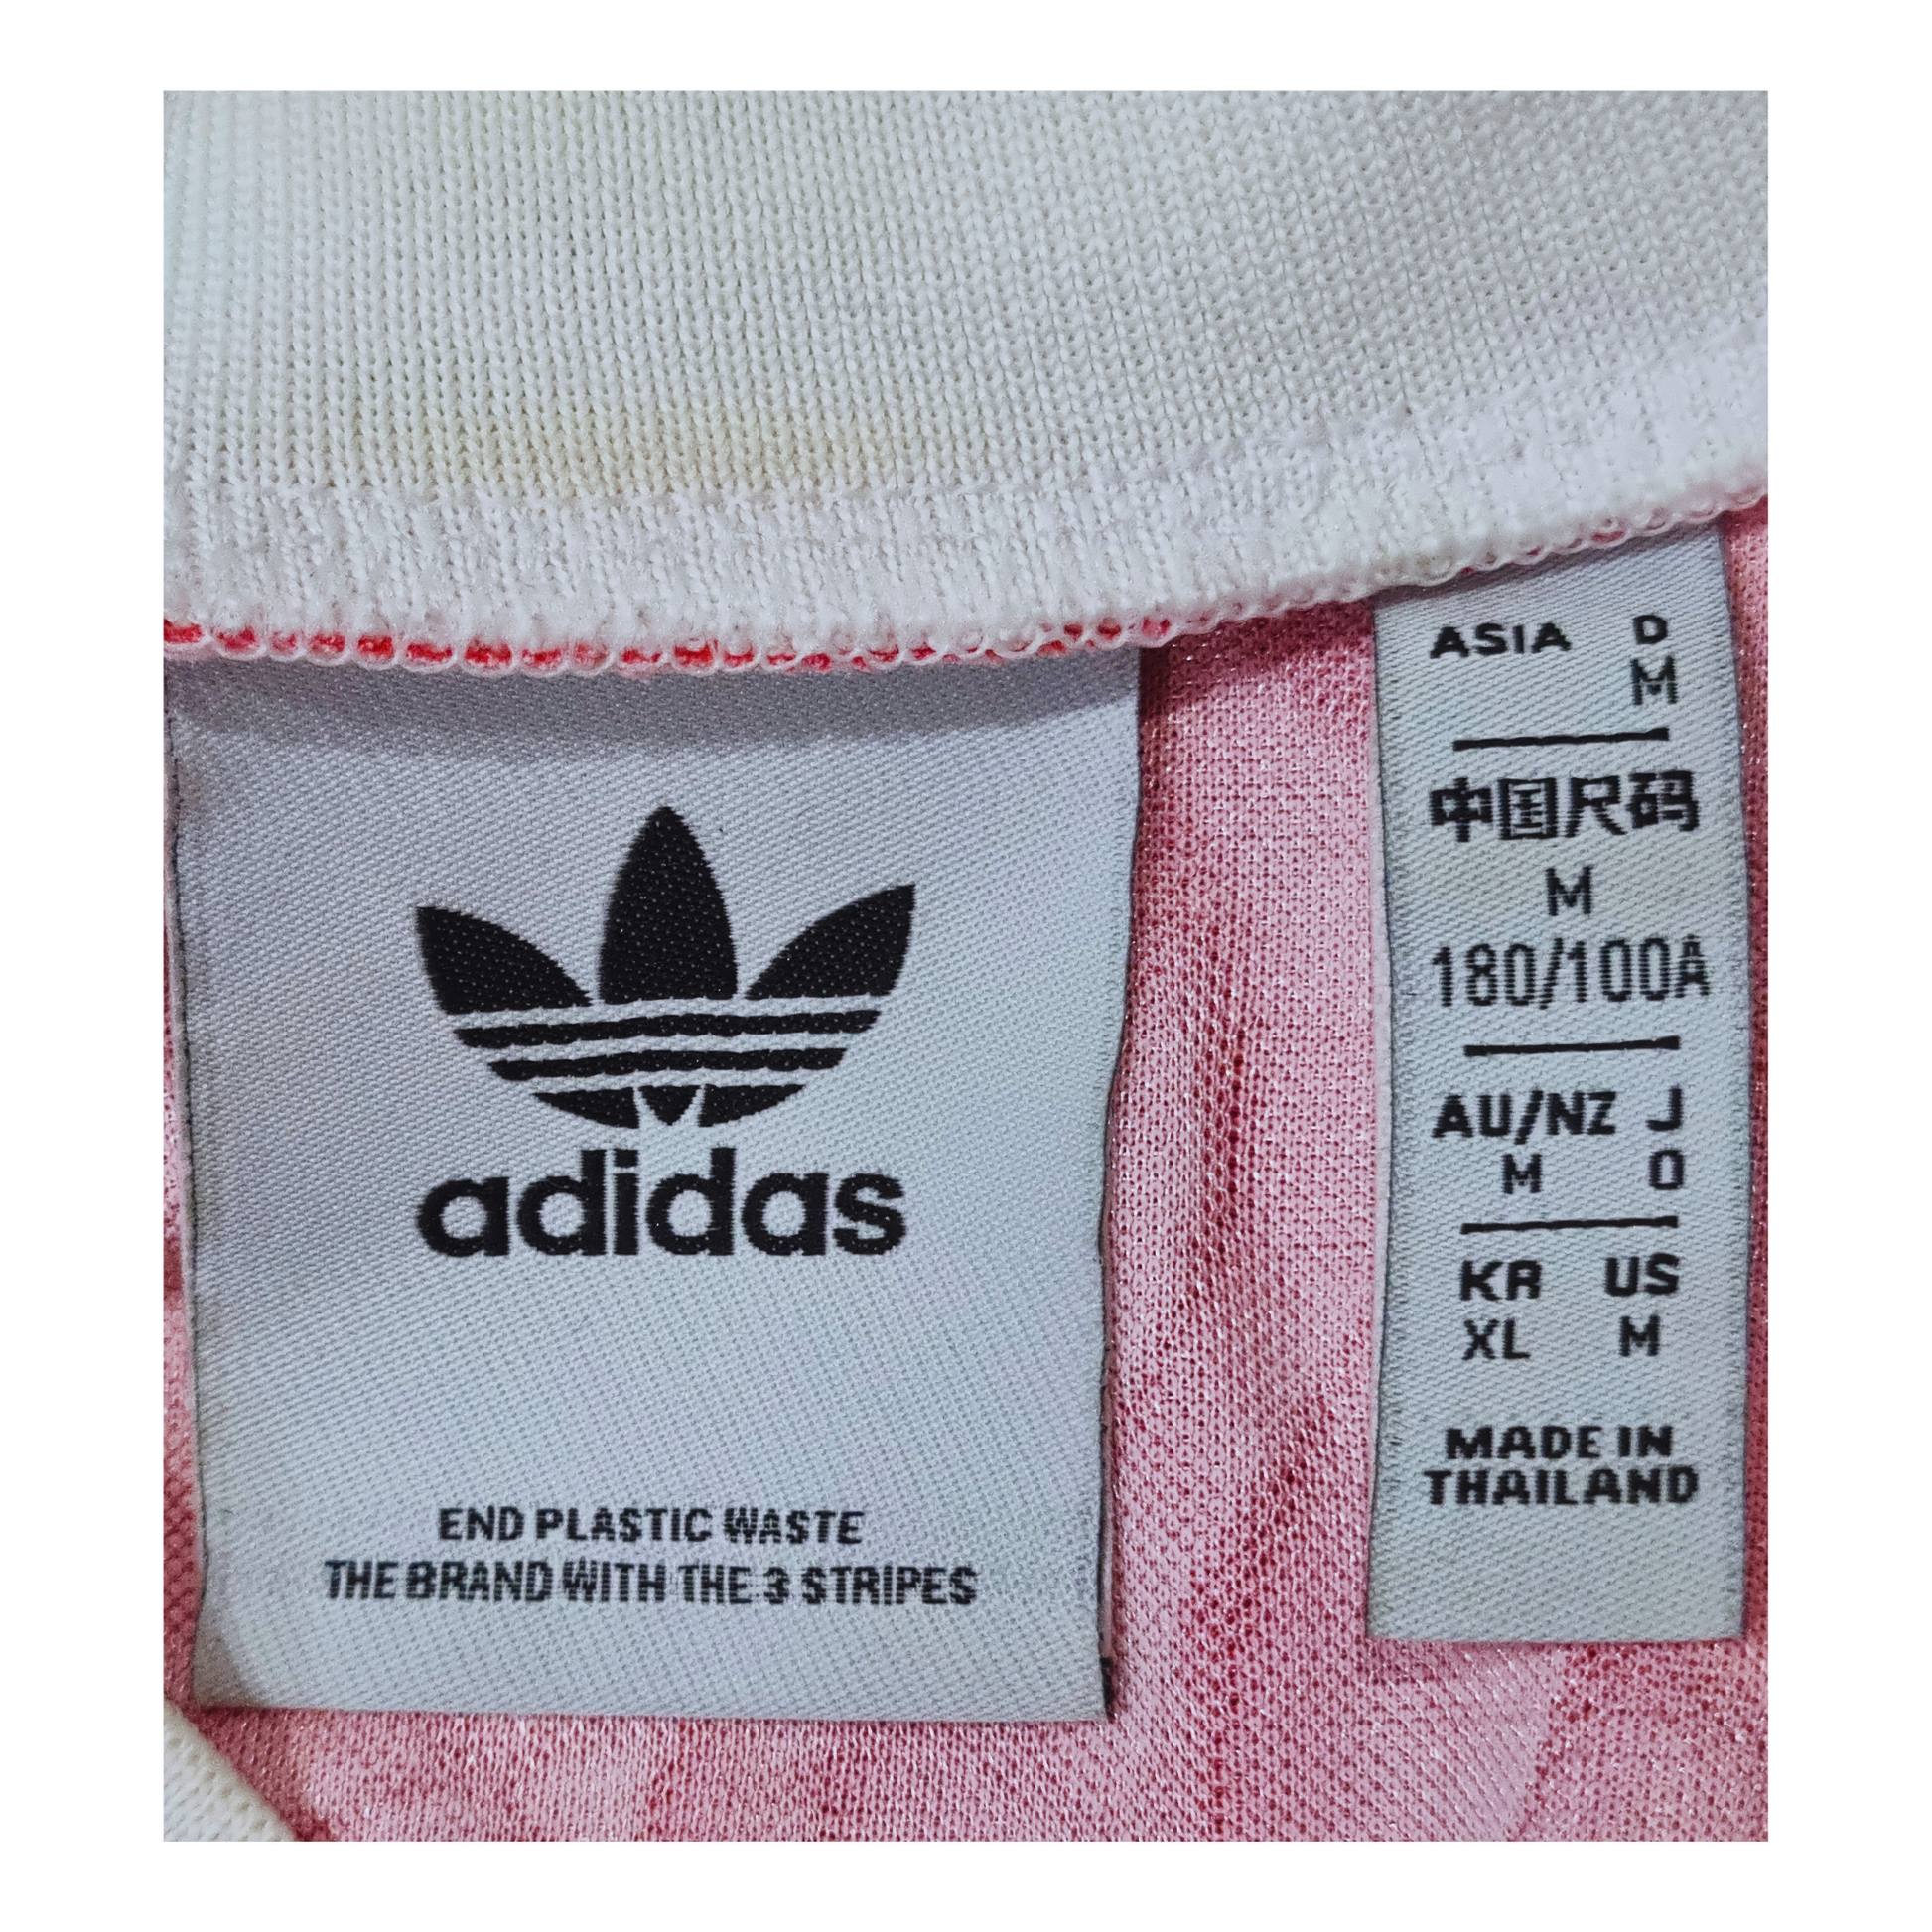 A pink Adidas Manchester United 1991/92 Home Jersey Re-release with a label on it.